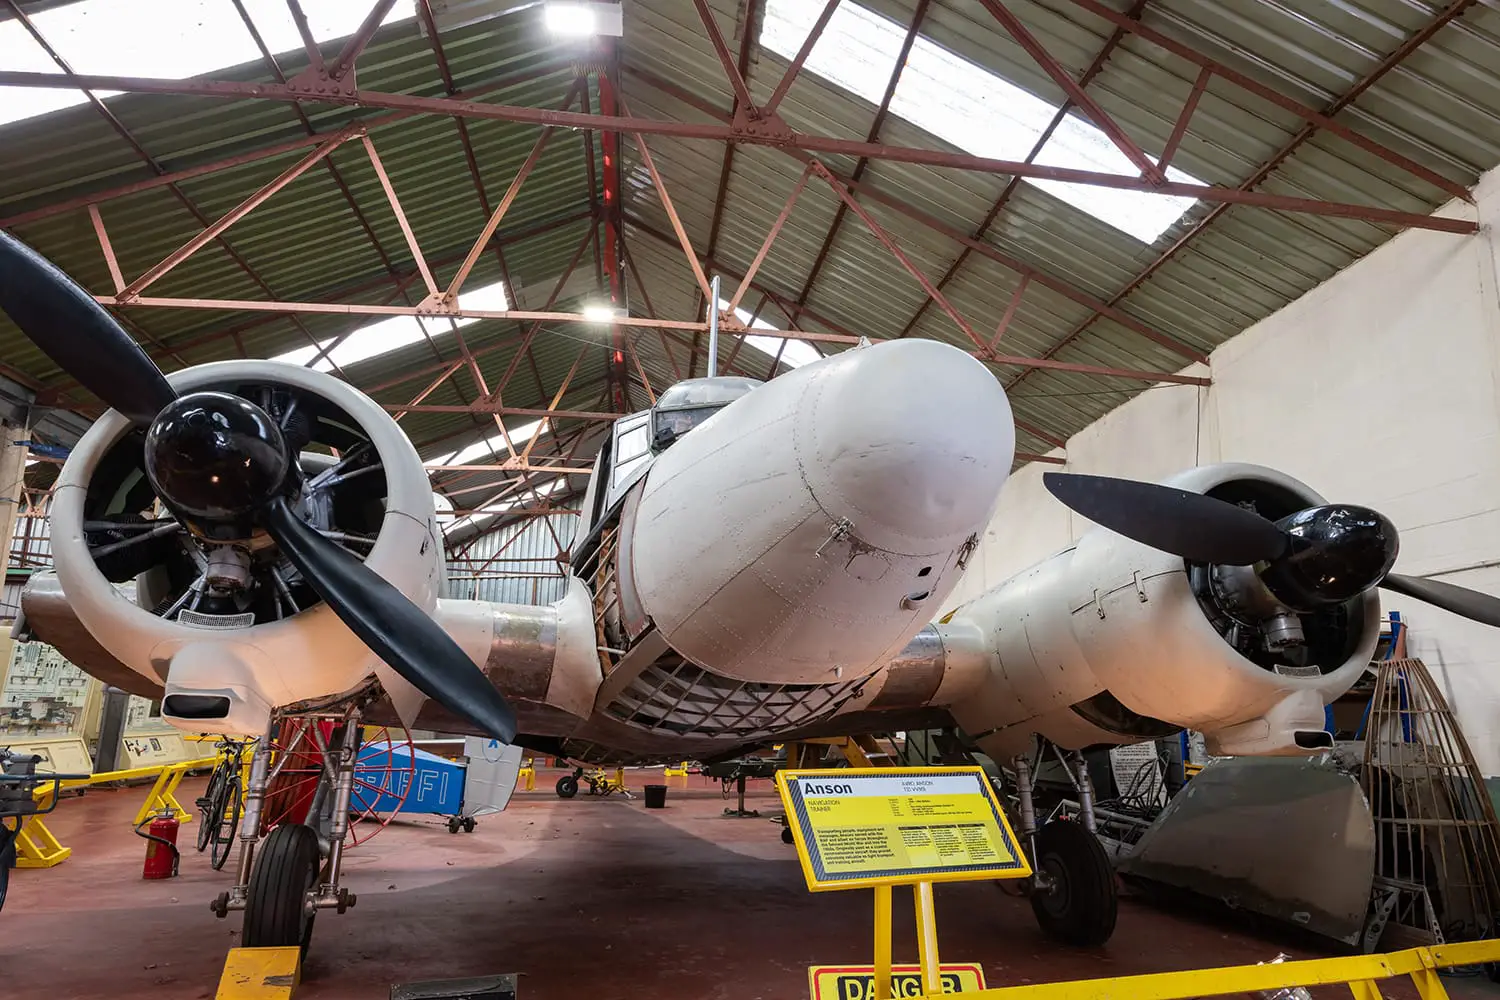 An Avro Anson T21 VV901 aircraft is being restored at the Yorkshire air museum in York, UK